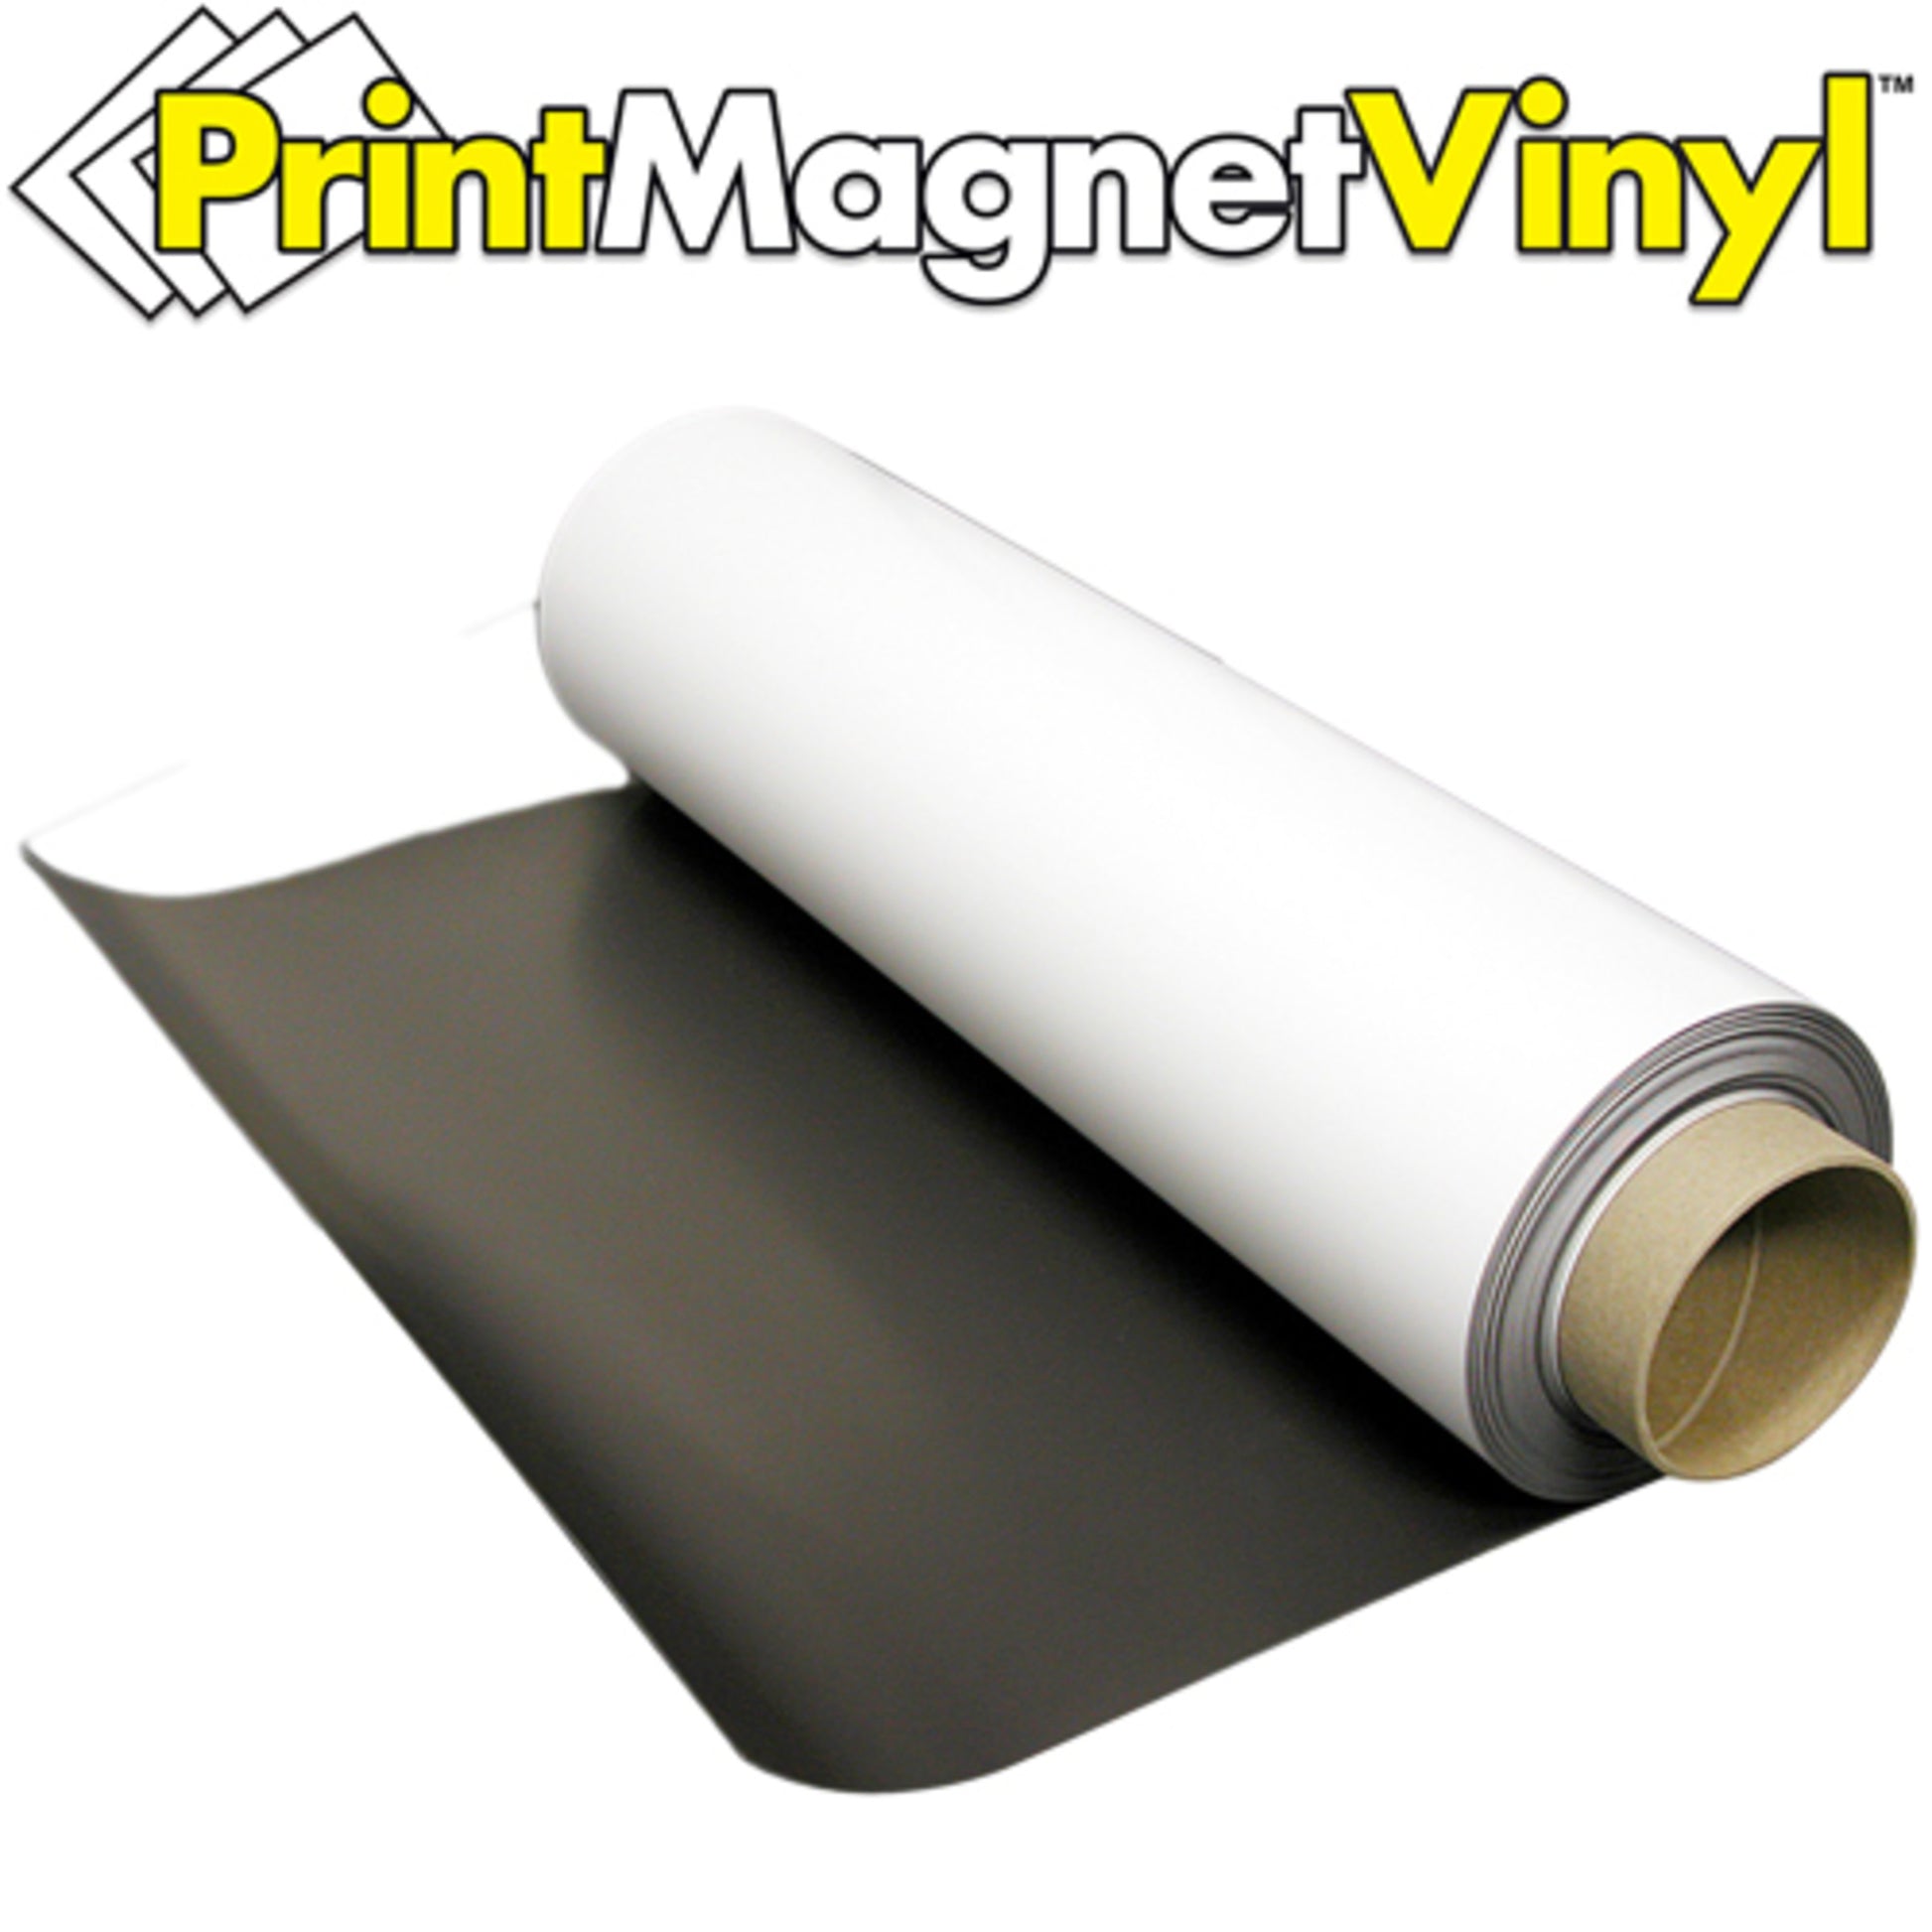 Load image into Gallery viewer, ZG2030GW50F PrintMagnetVinyl™ Flexible Magnetic Sheet - In Use